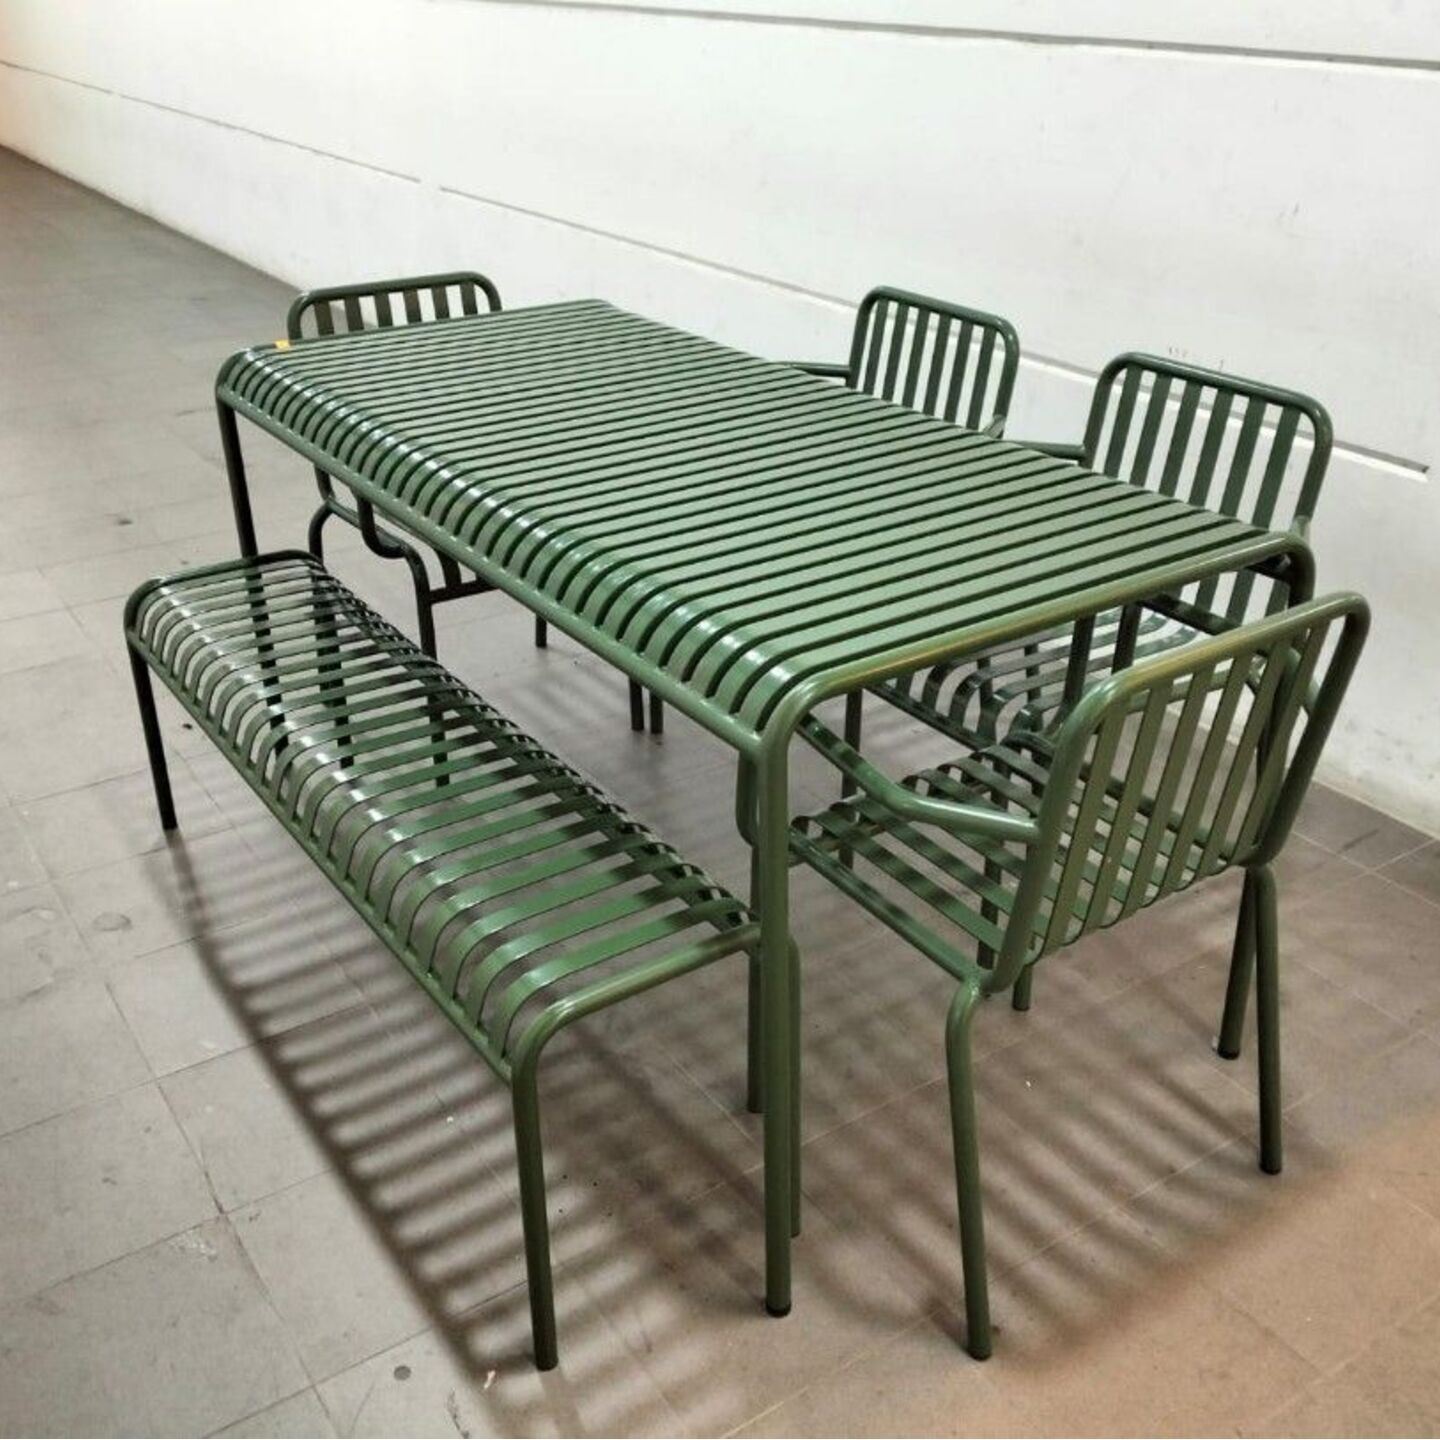 ACRES Modern Outdoor Dining Table with 4 Chairs and Bench